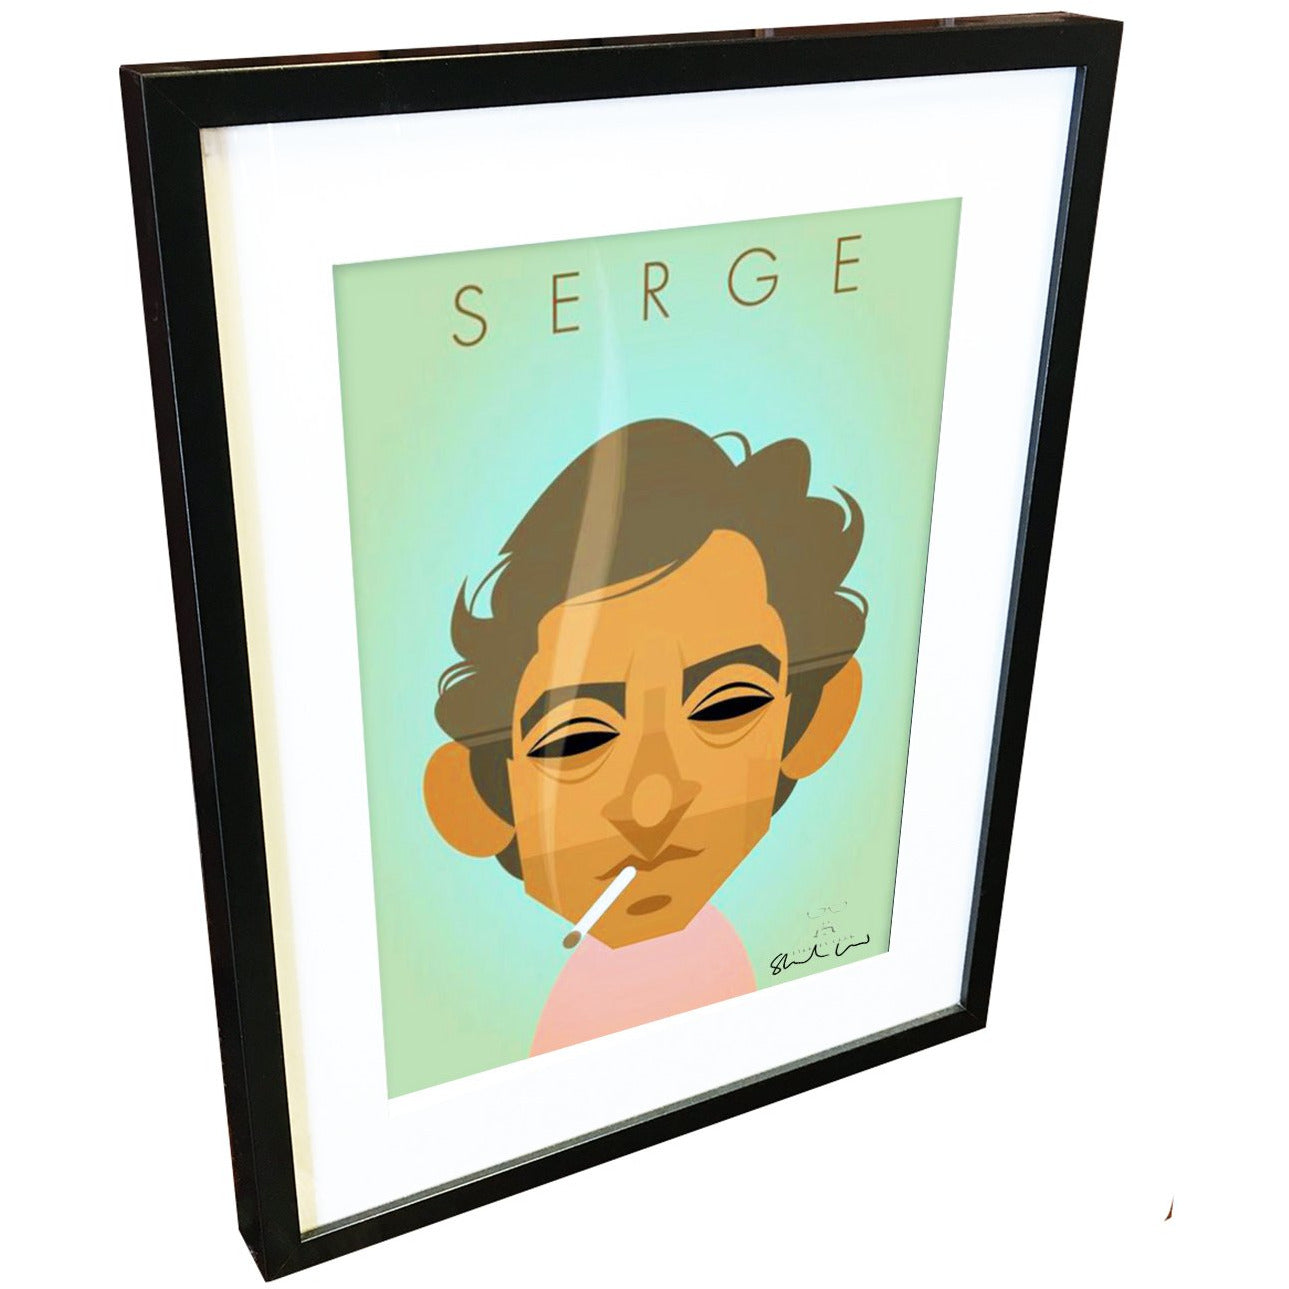 Serge Gainsbourg by Stanley Chow - Signed and stamped fine art print - Egoiste Gallery - Art Gallery in Manchester City Centre